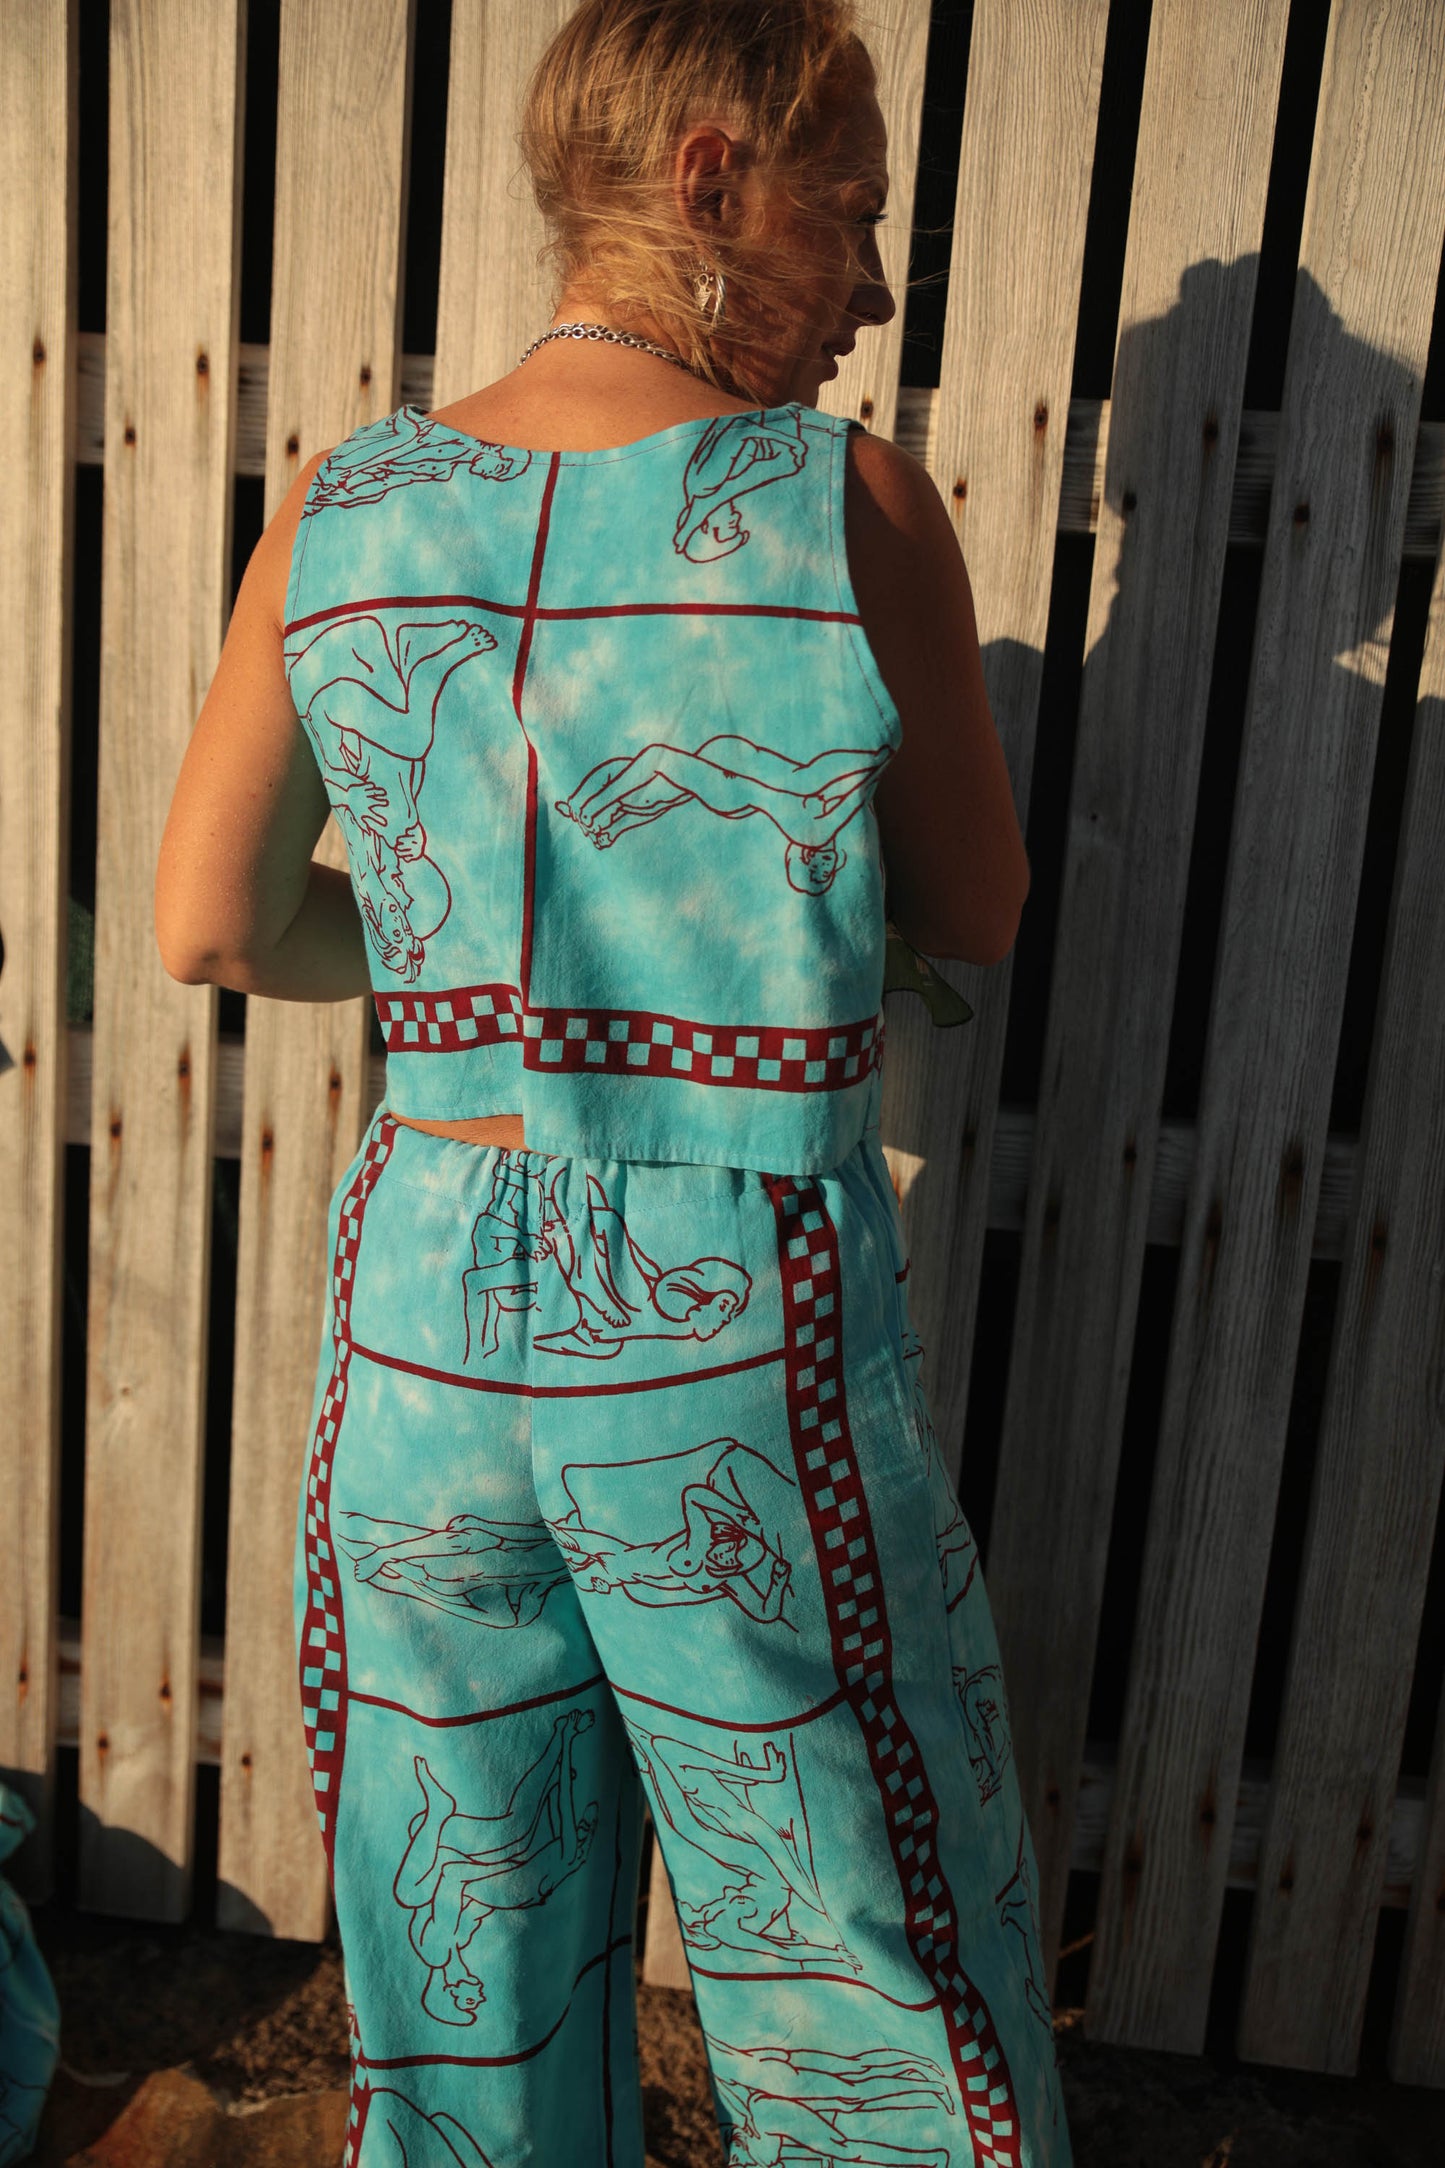 Up-cycled vintage cotton 2 piece set top and length kimono cover up with printed karma sutra design in bright blue pants sold separate